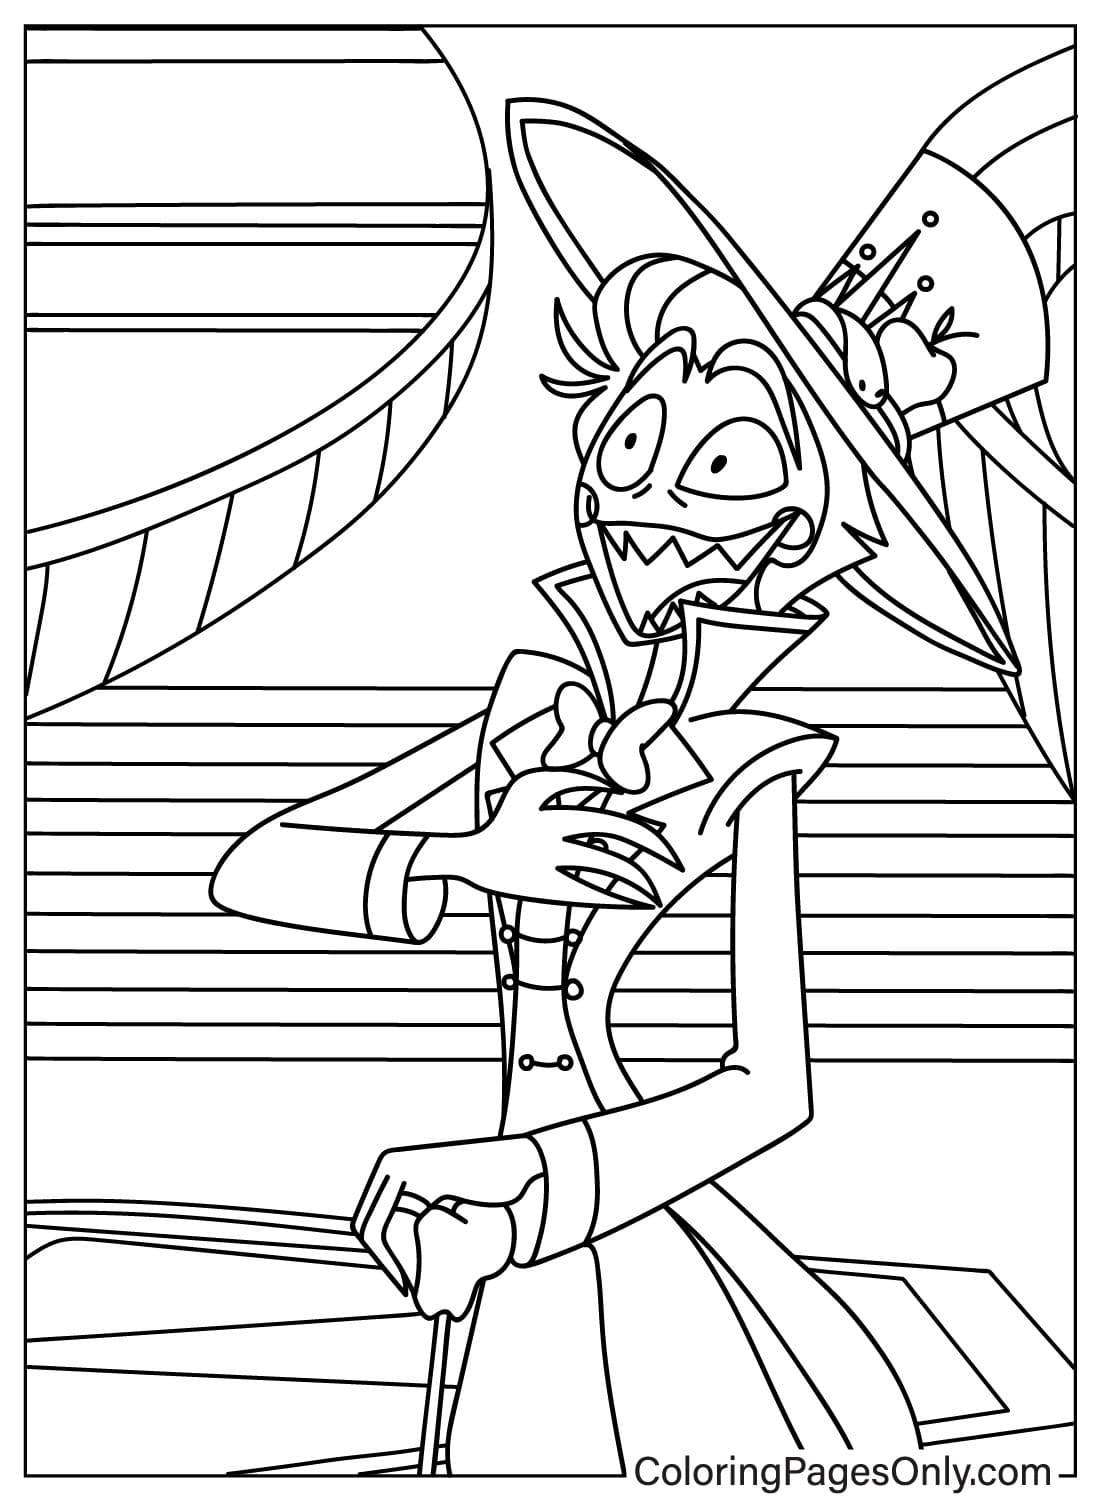 Images Lucifer Morningstar Coloring Page from Lucifer Morningstar